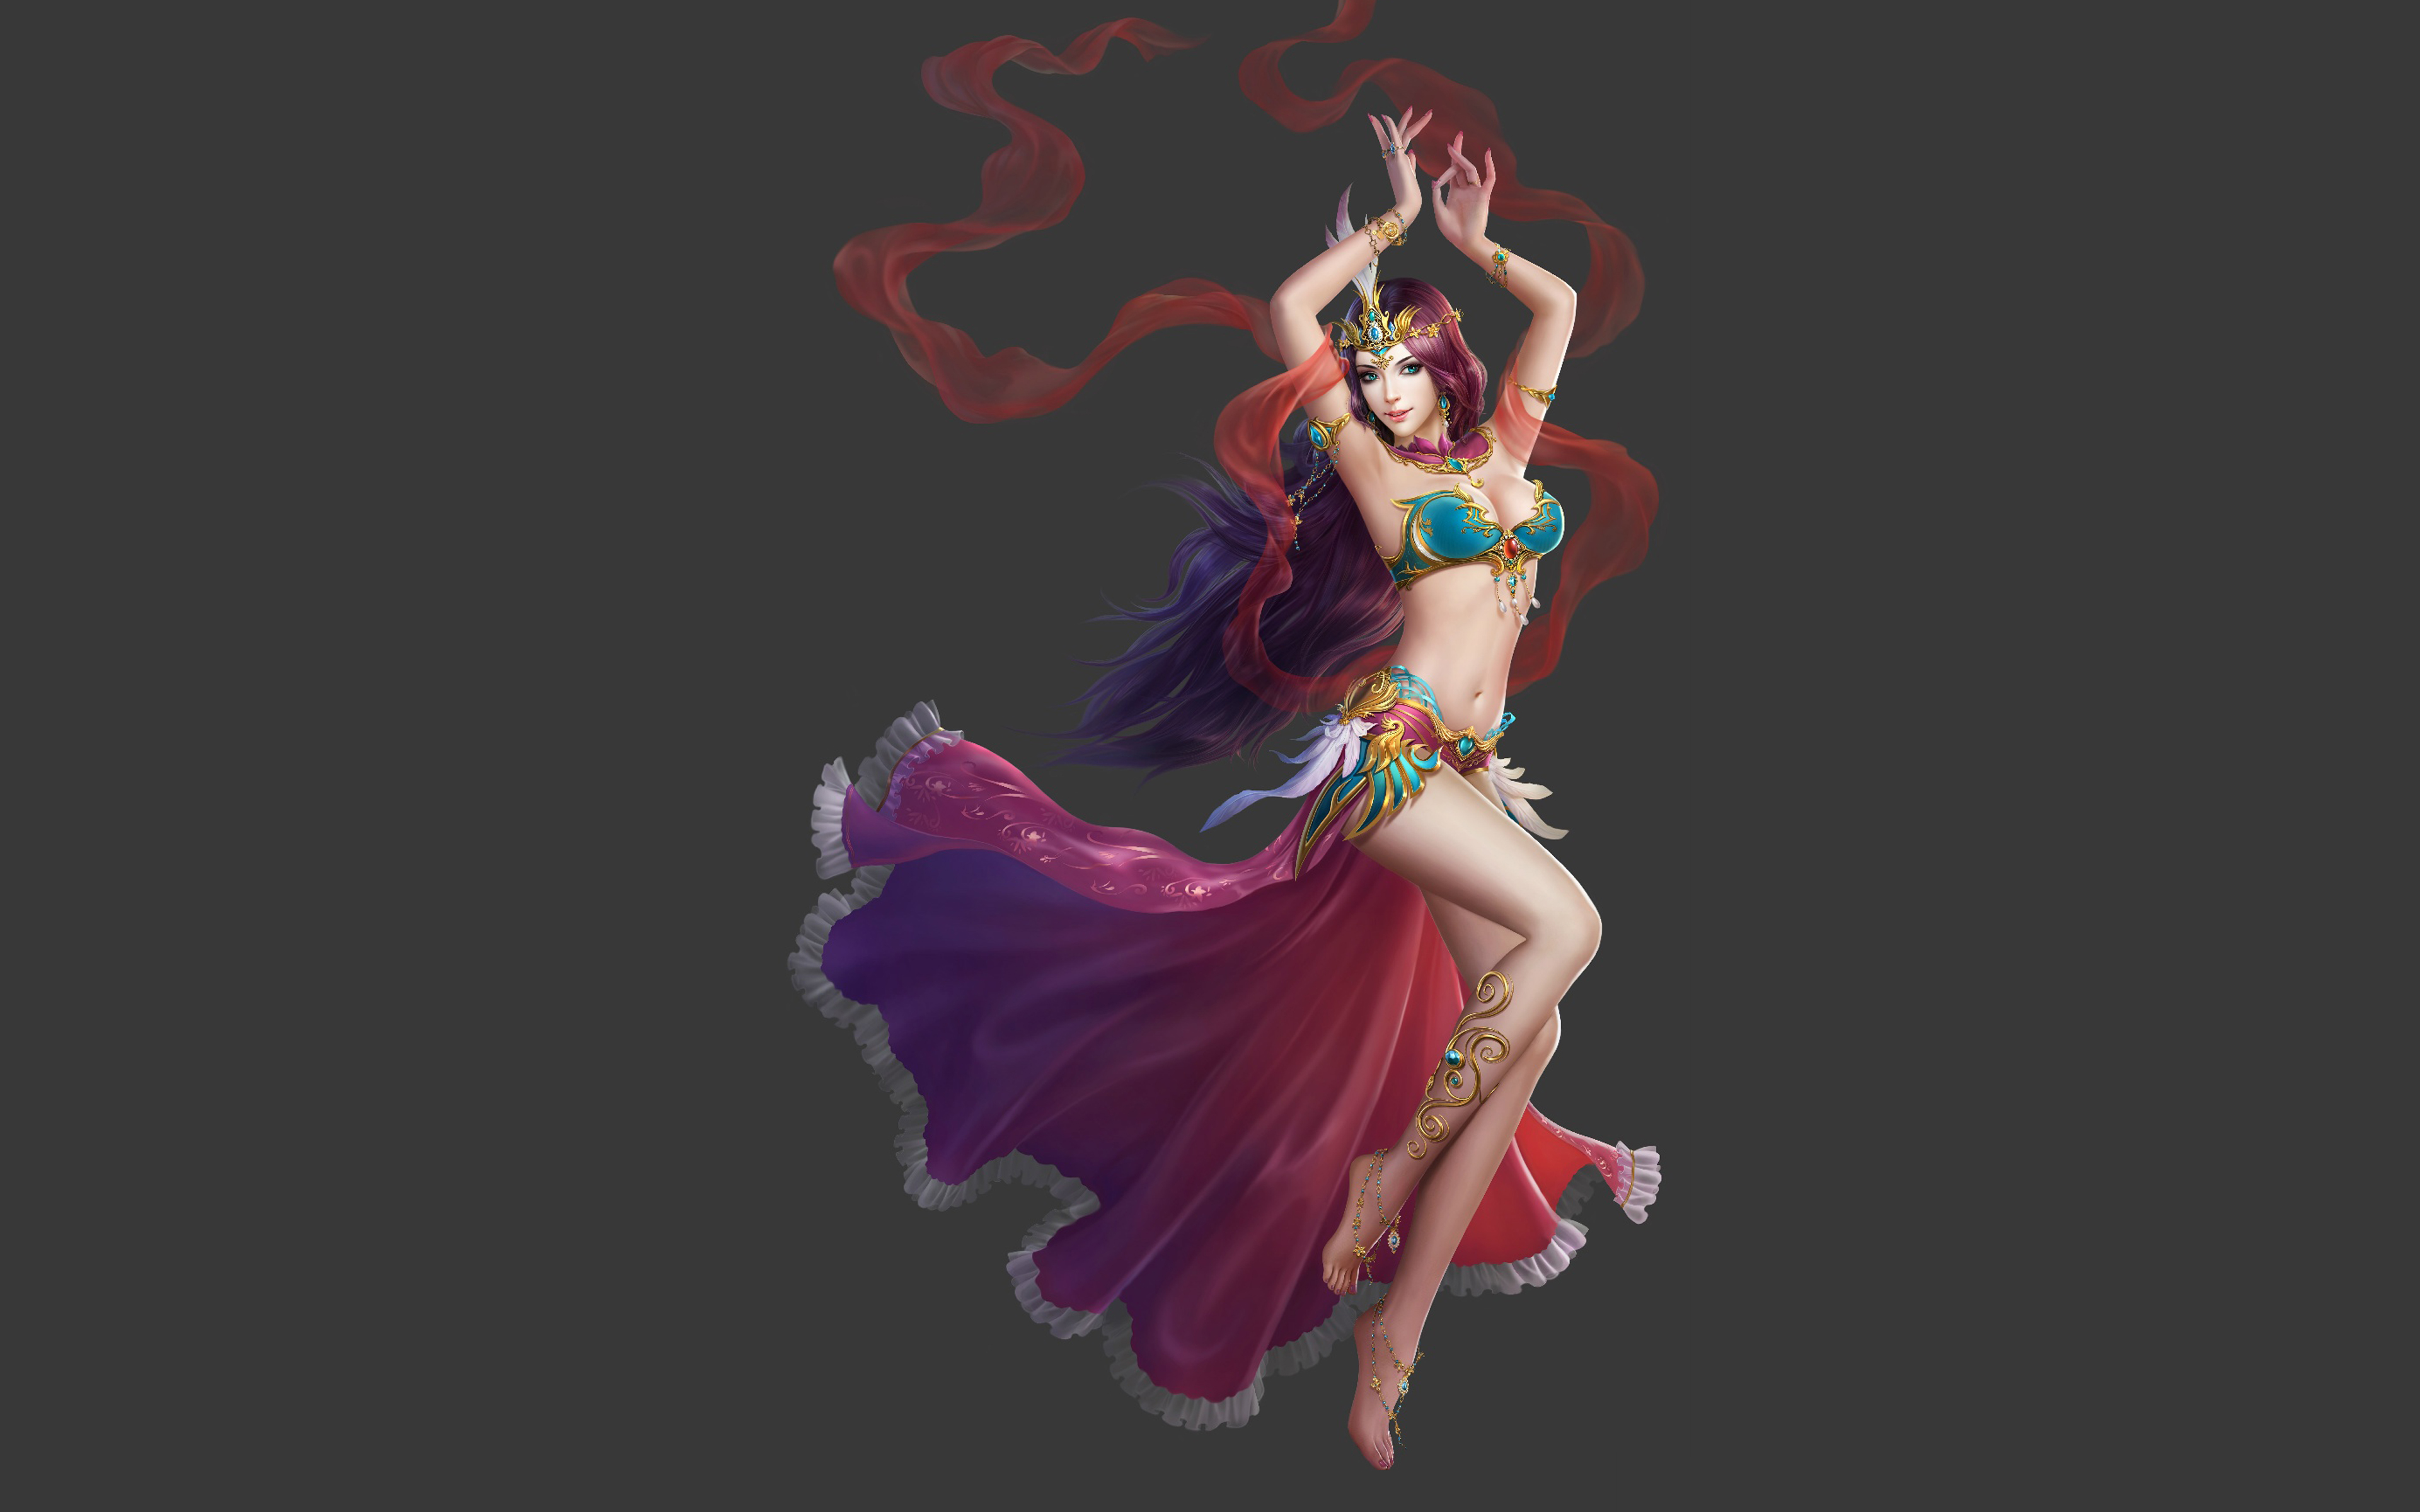 Oriental Dancer Girl with Red Long Hair Silk Clothing